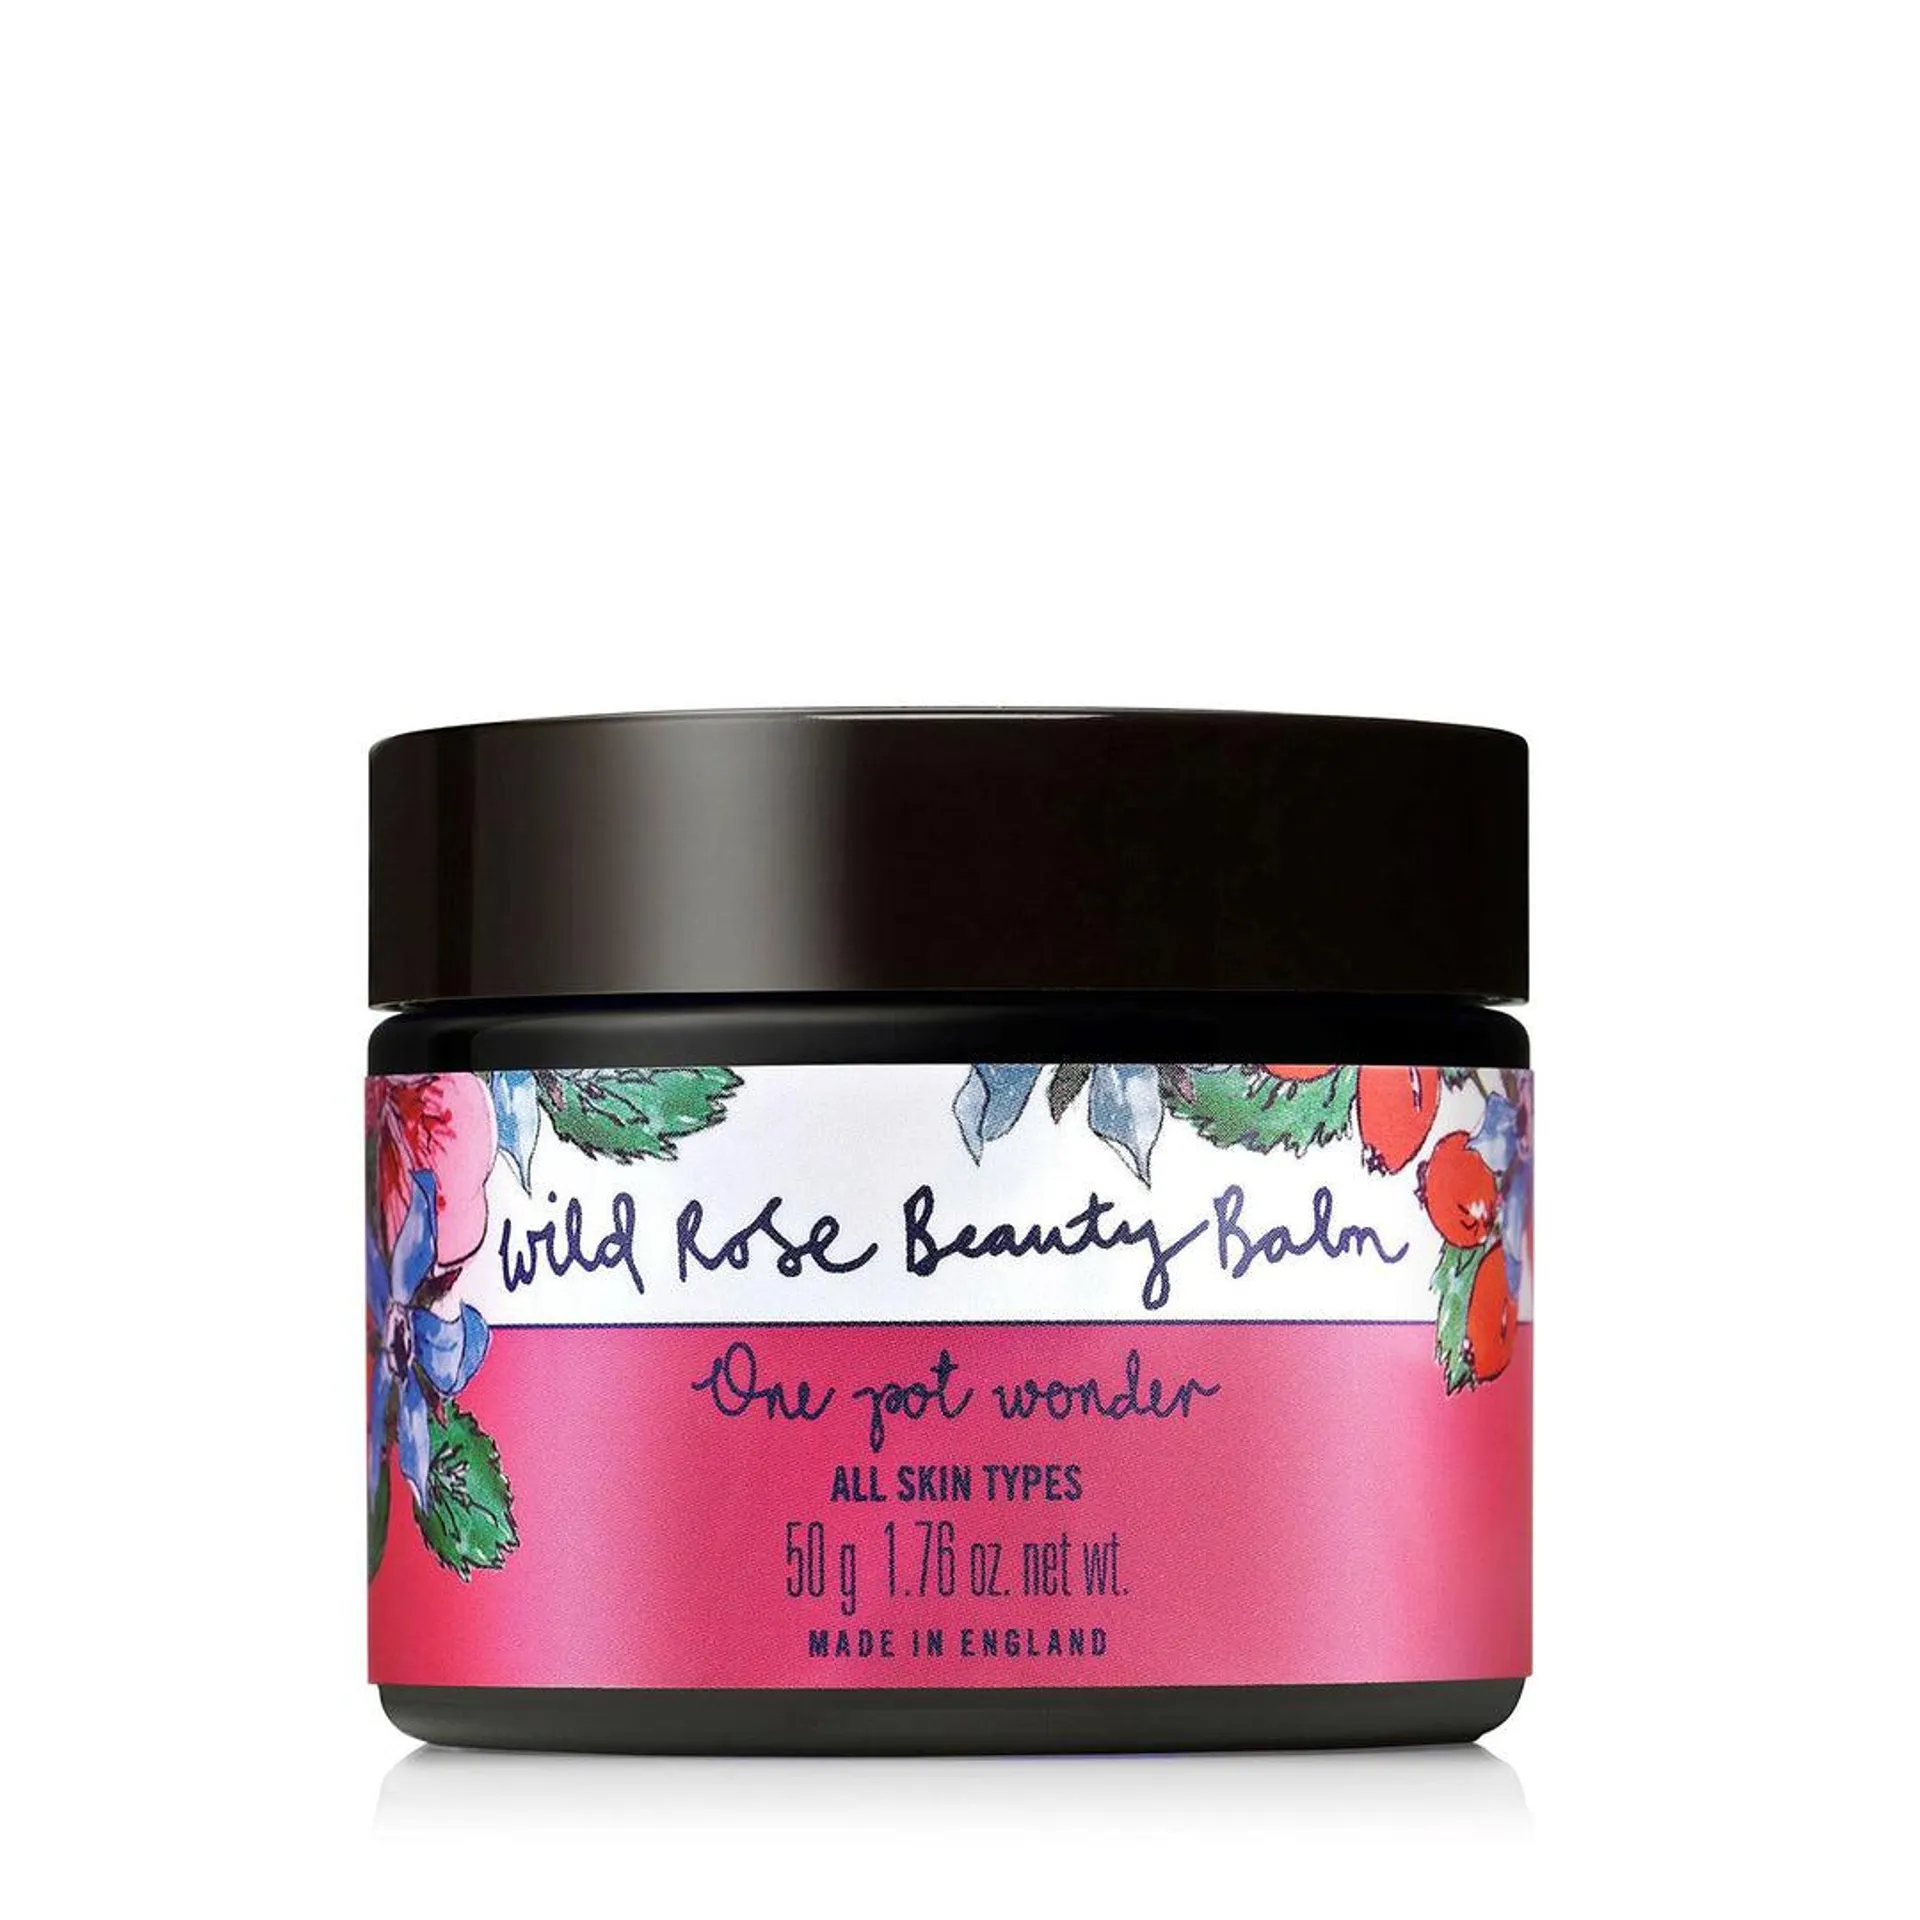 Wild Rose Beauty Balm 50g - Without cloth